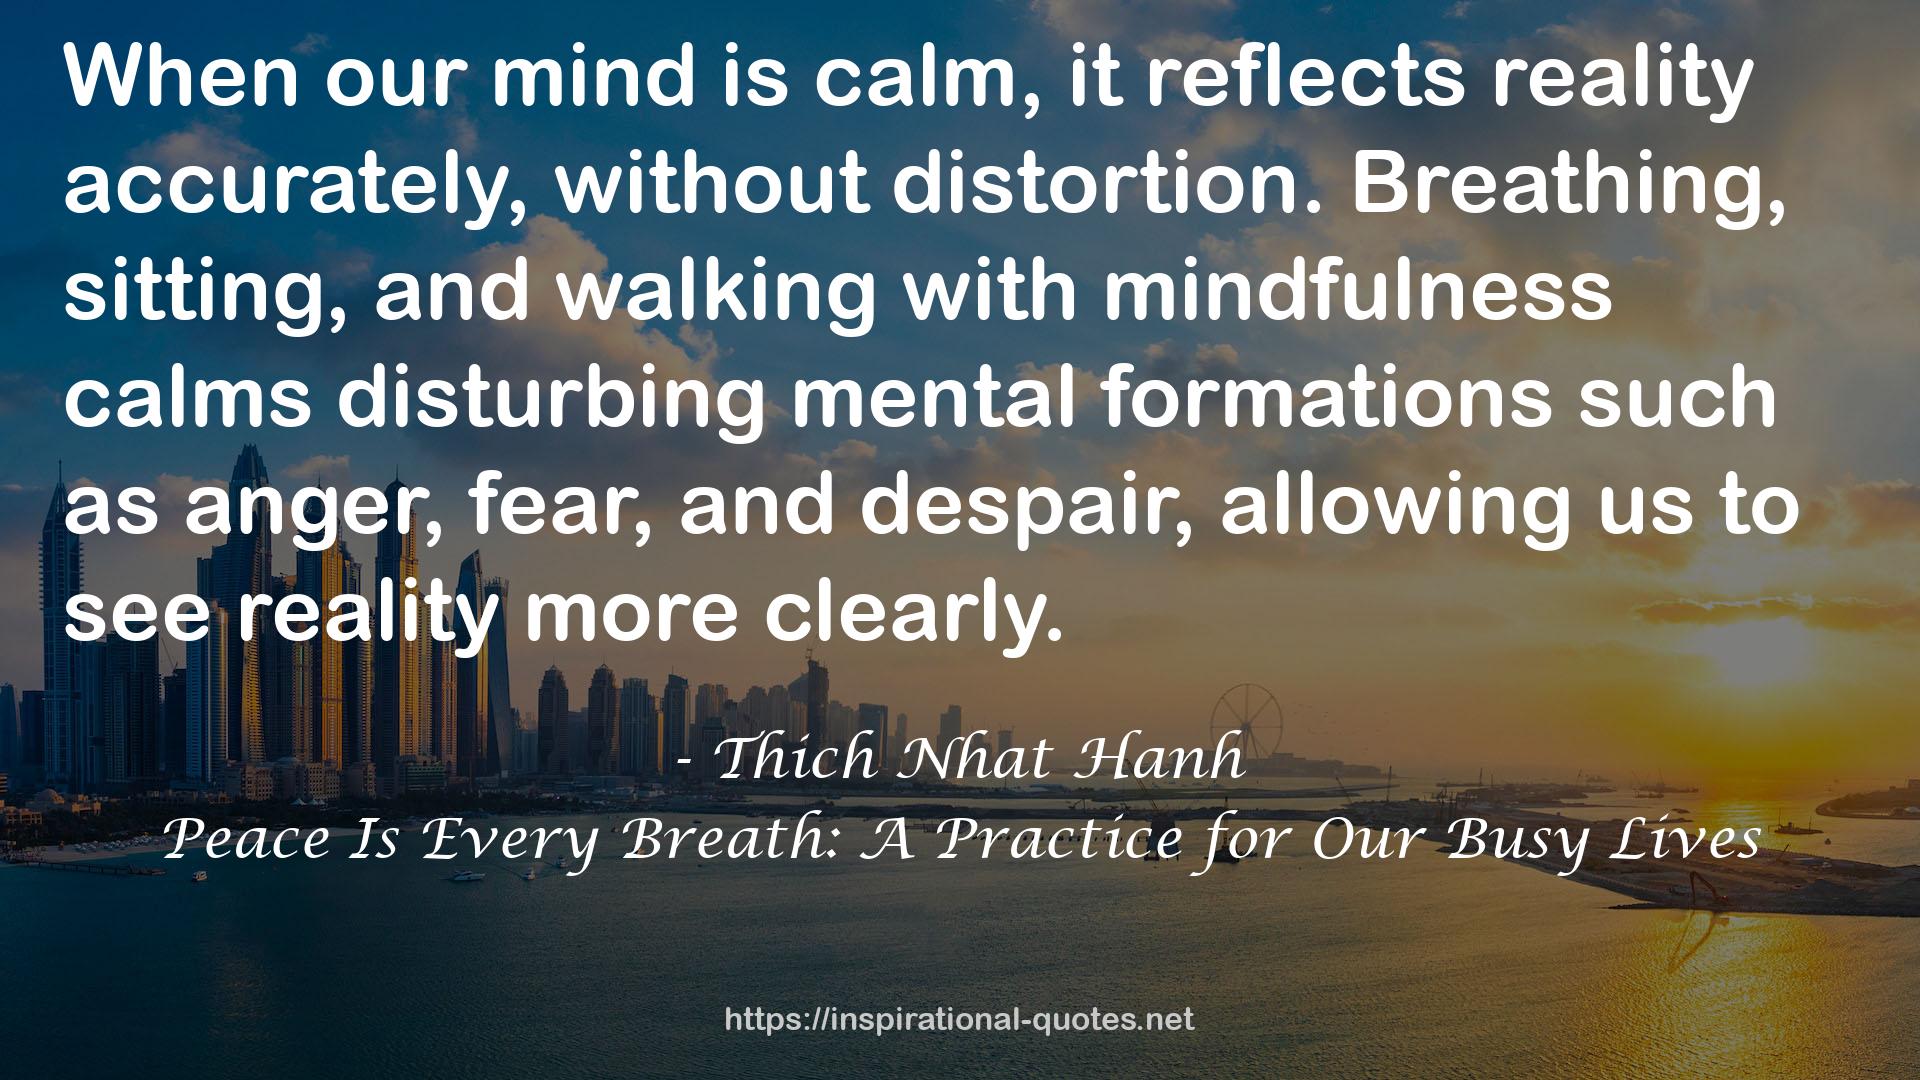 Peace Is Every Breath: A Practice for Our Busy Lives QUOTES